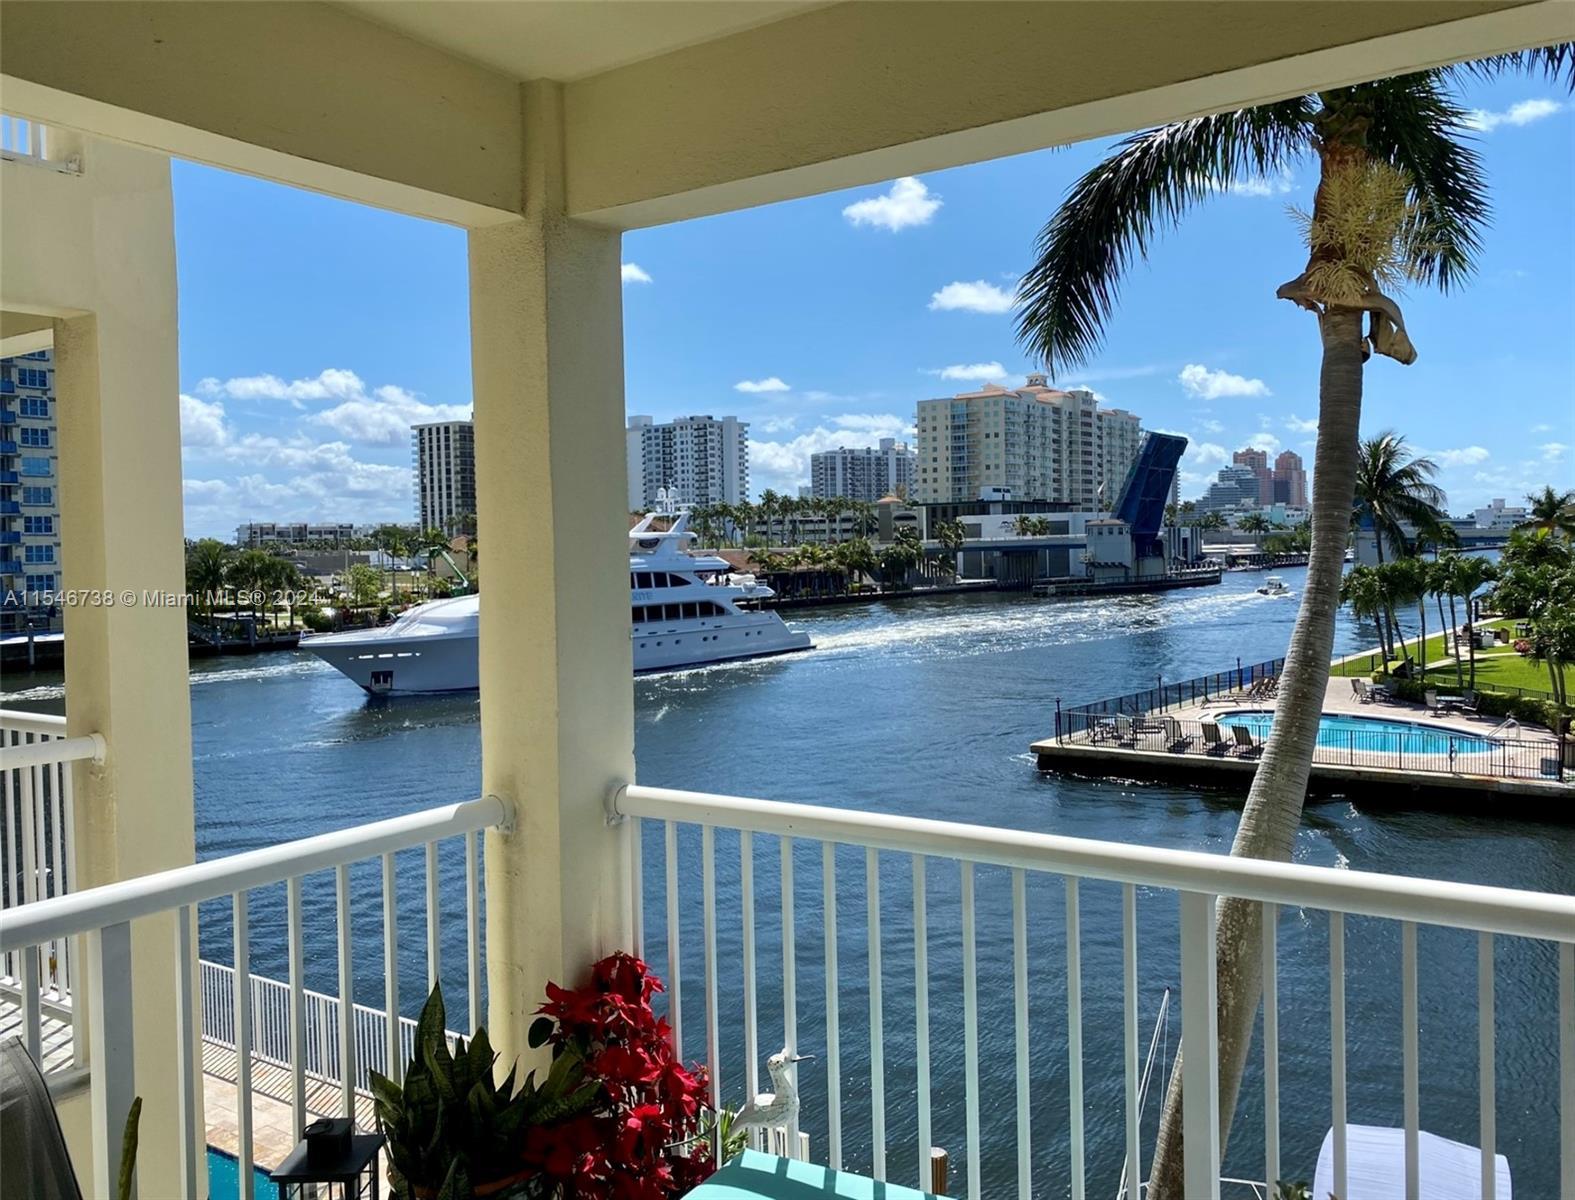 Photo of 2900 NE 33rd Ct #303 in Fort Lauderdale, FL